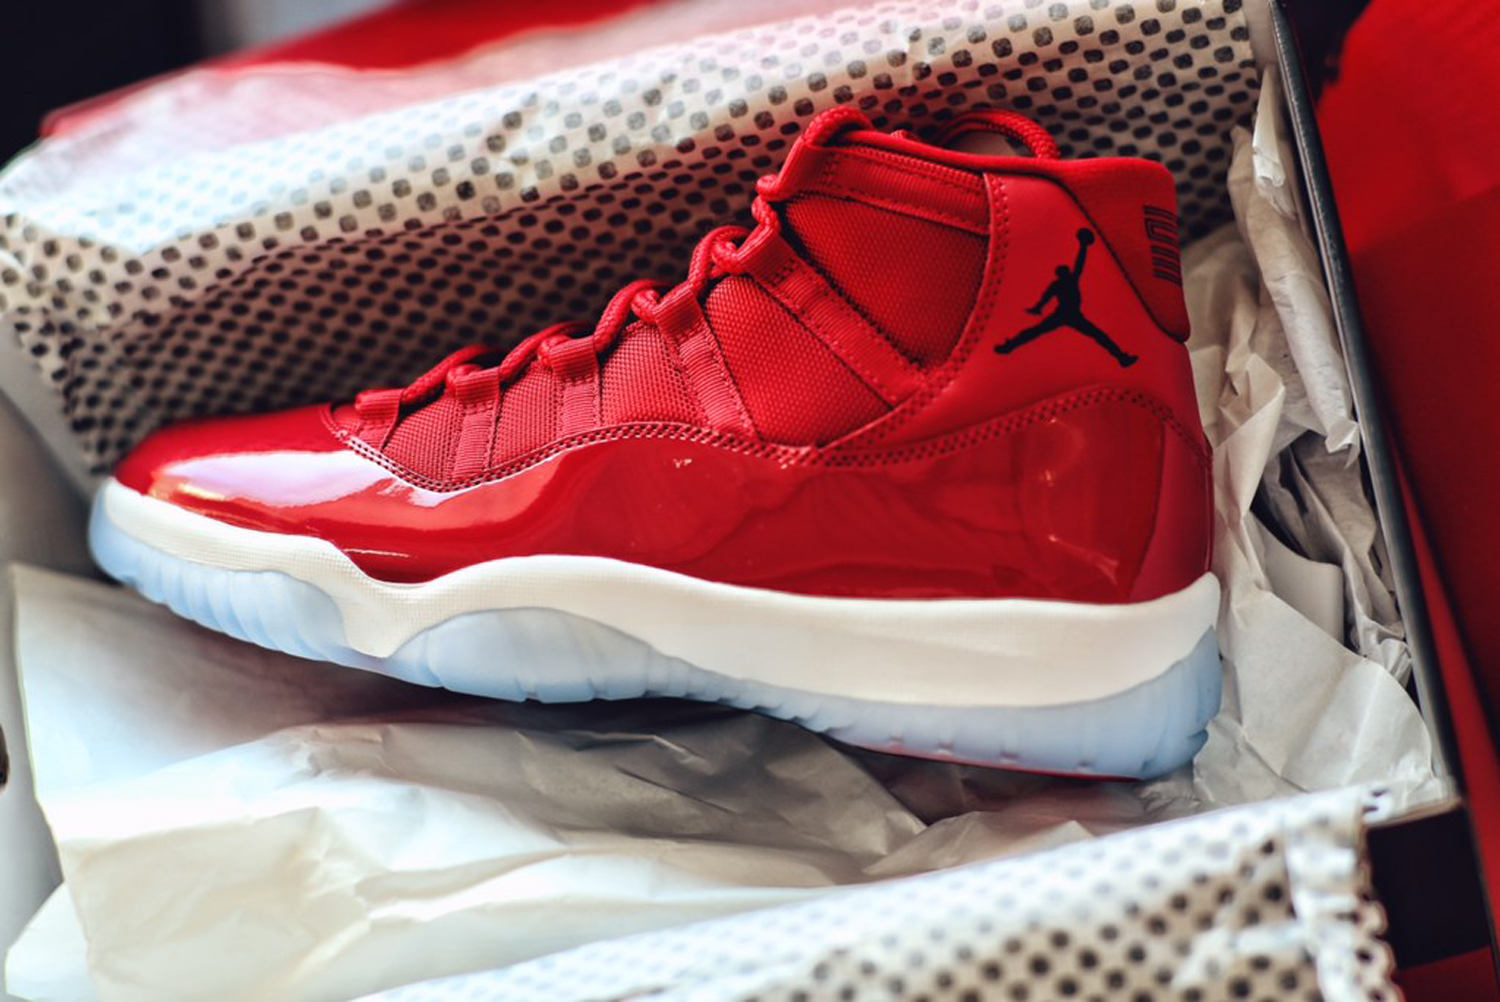 Up Close and Personal with the Air Jordan 11 'Win Like '96 ...